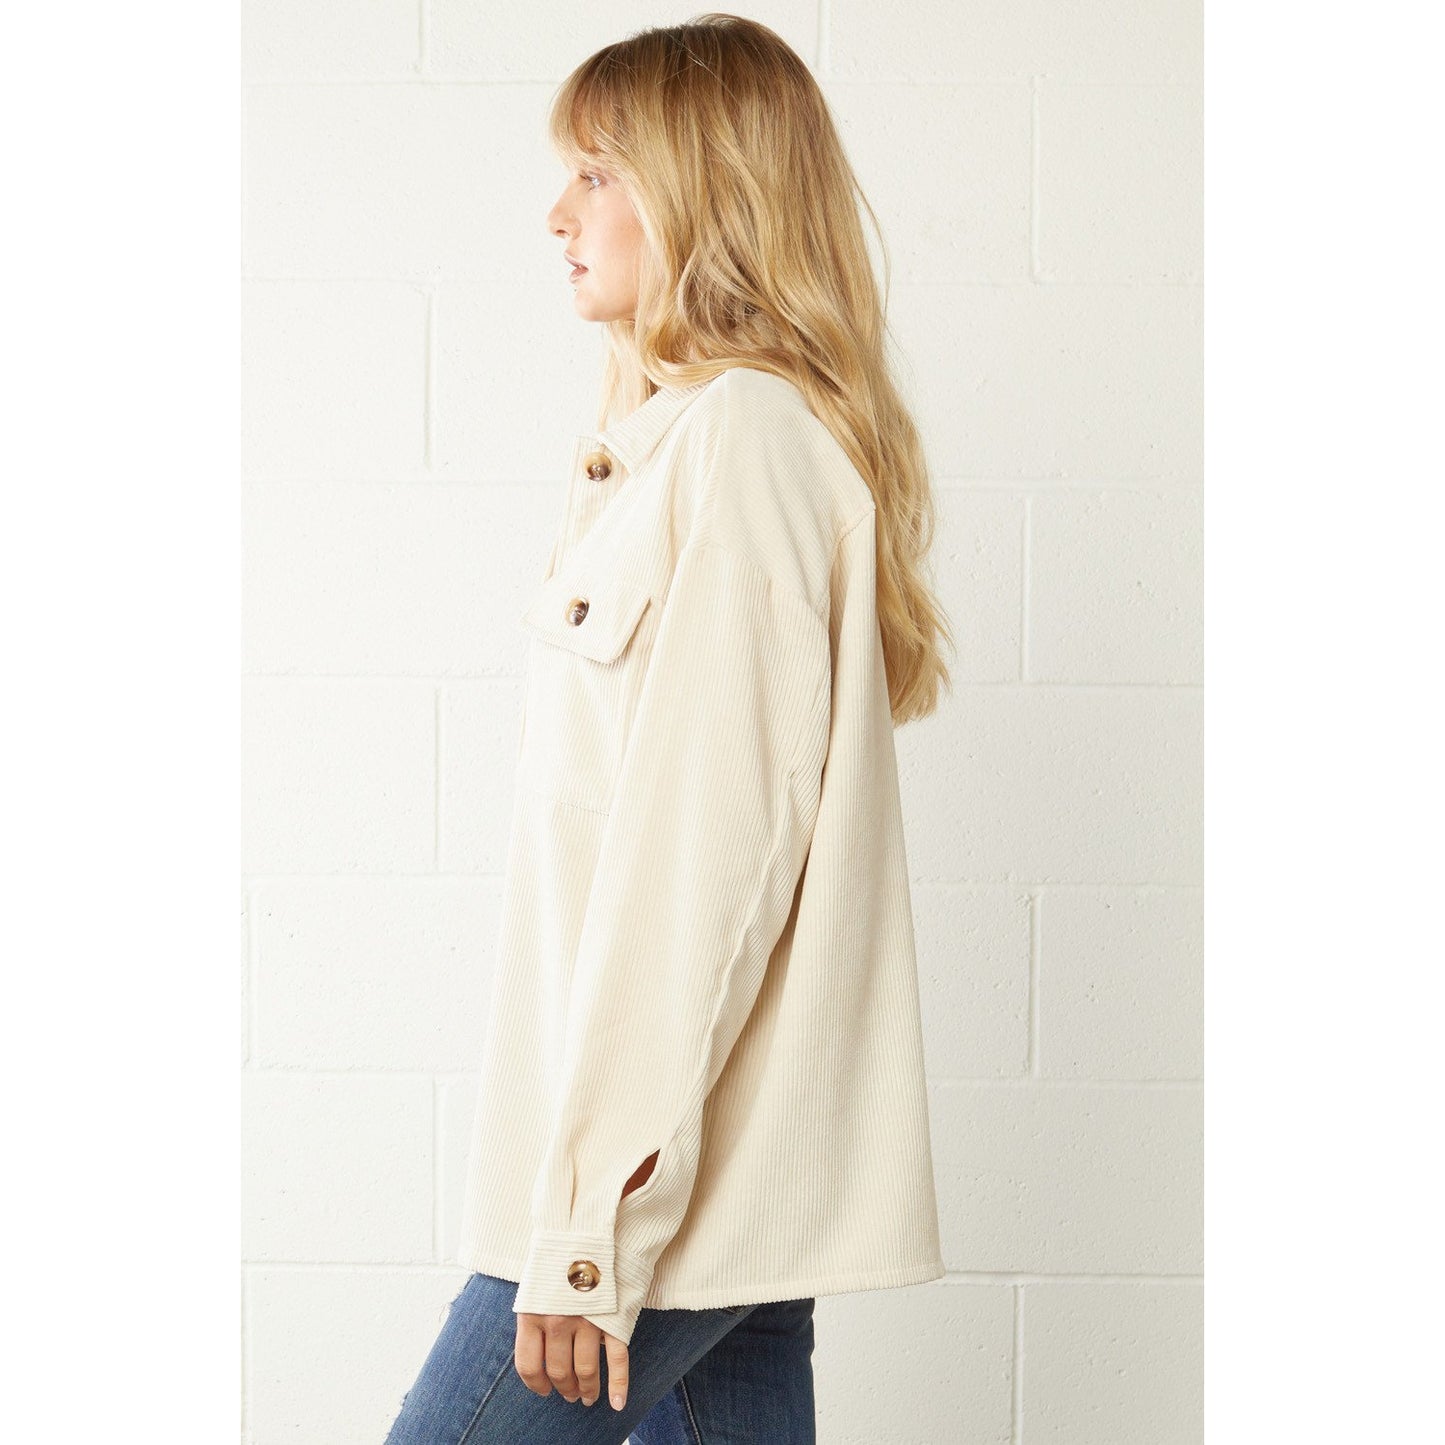 Solid Natural Corduroy Button Front Top